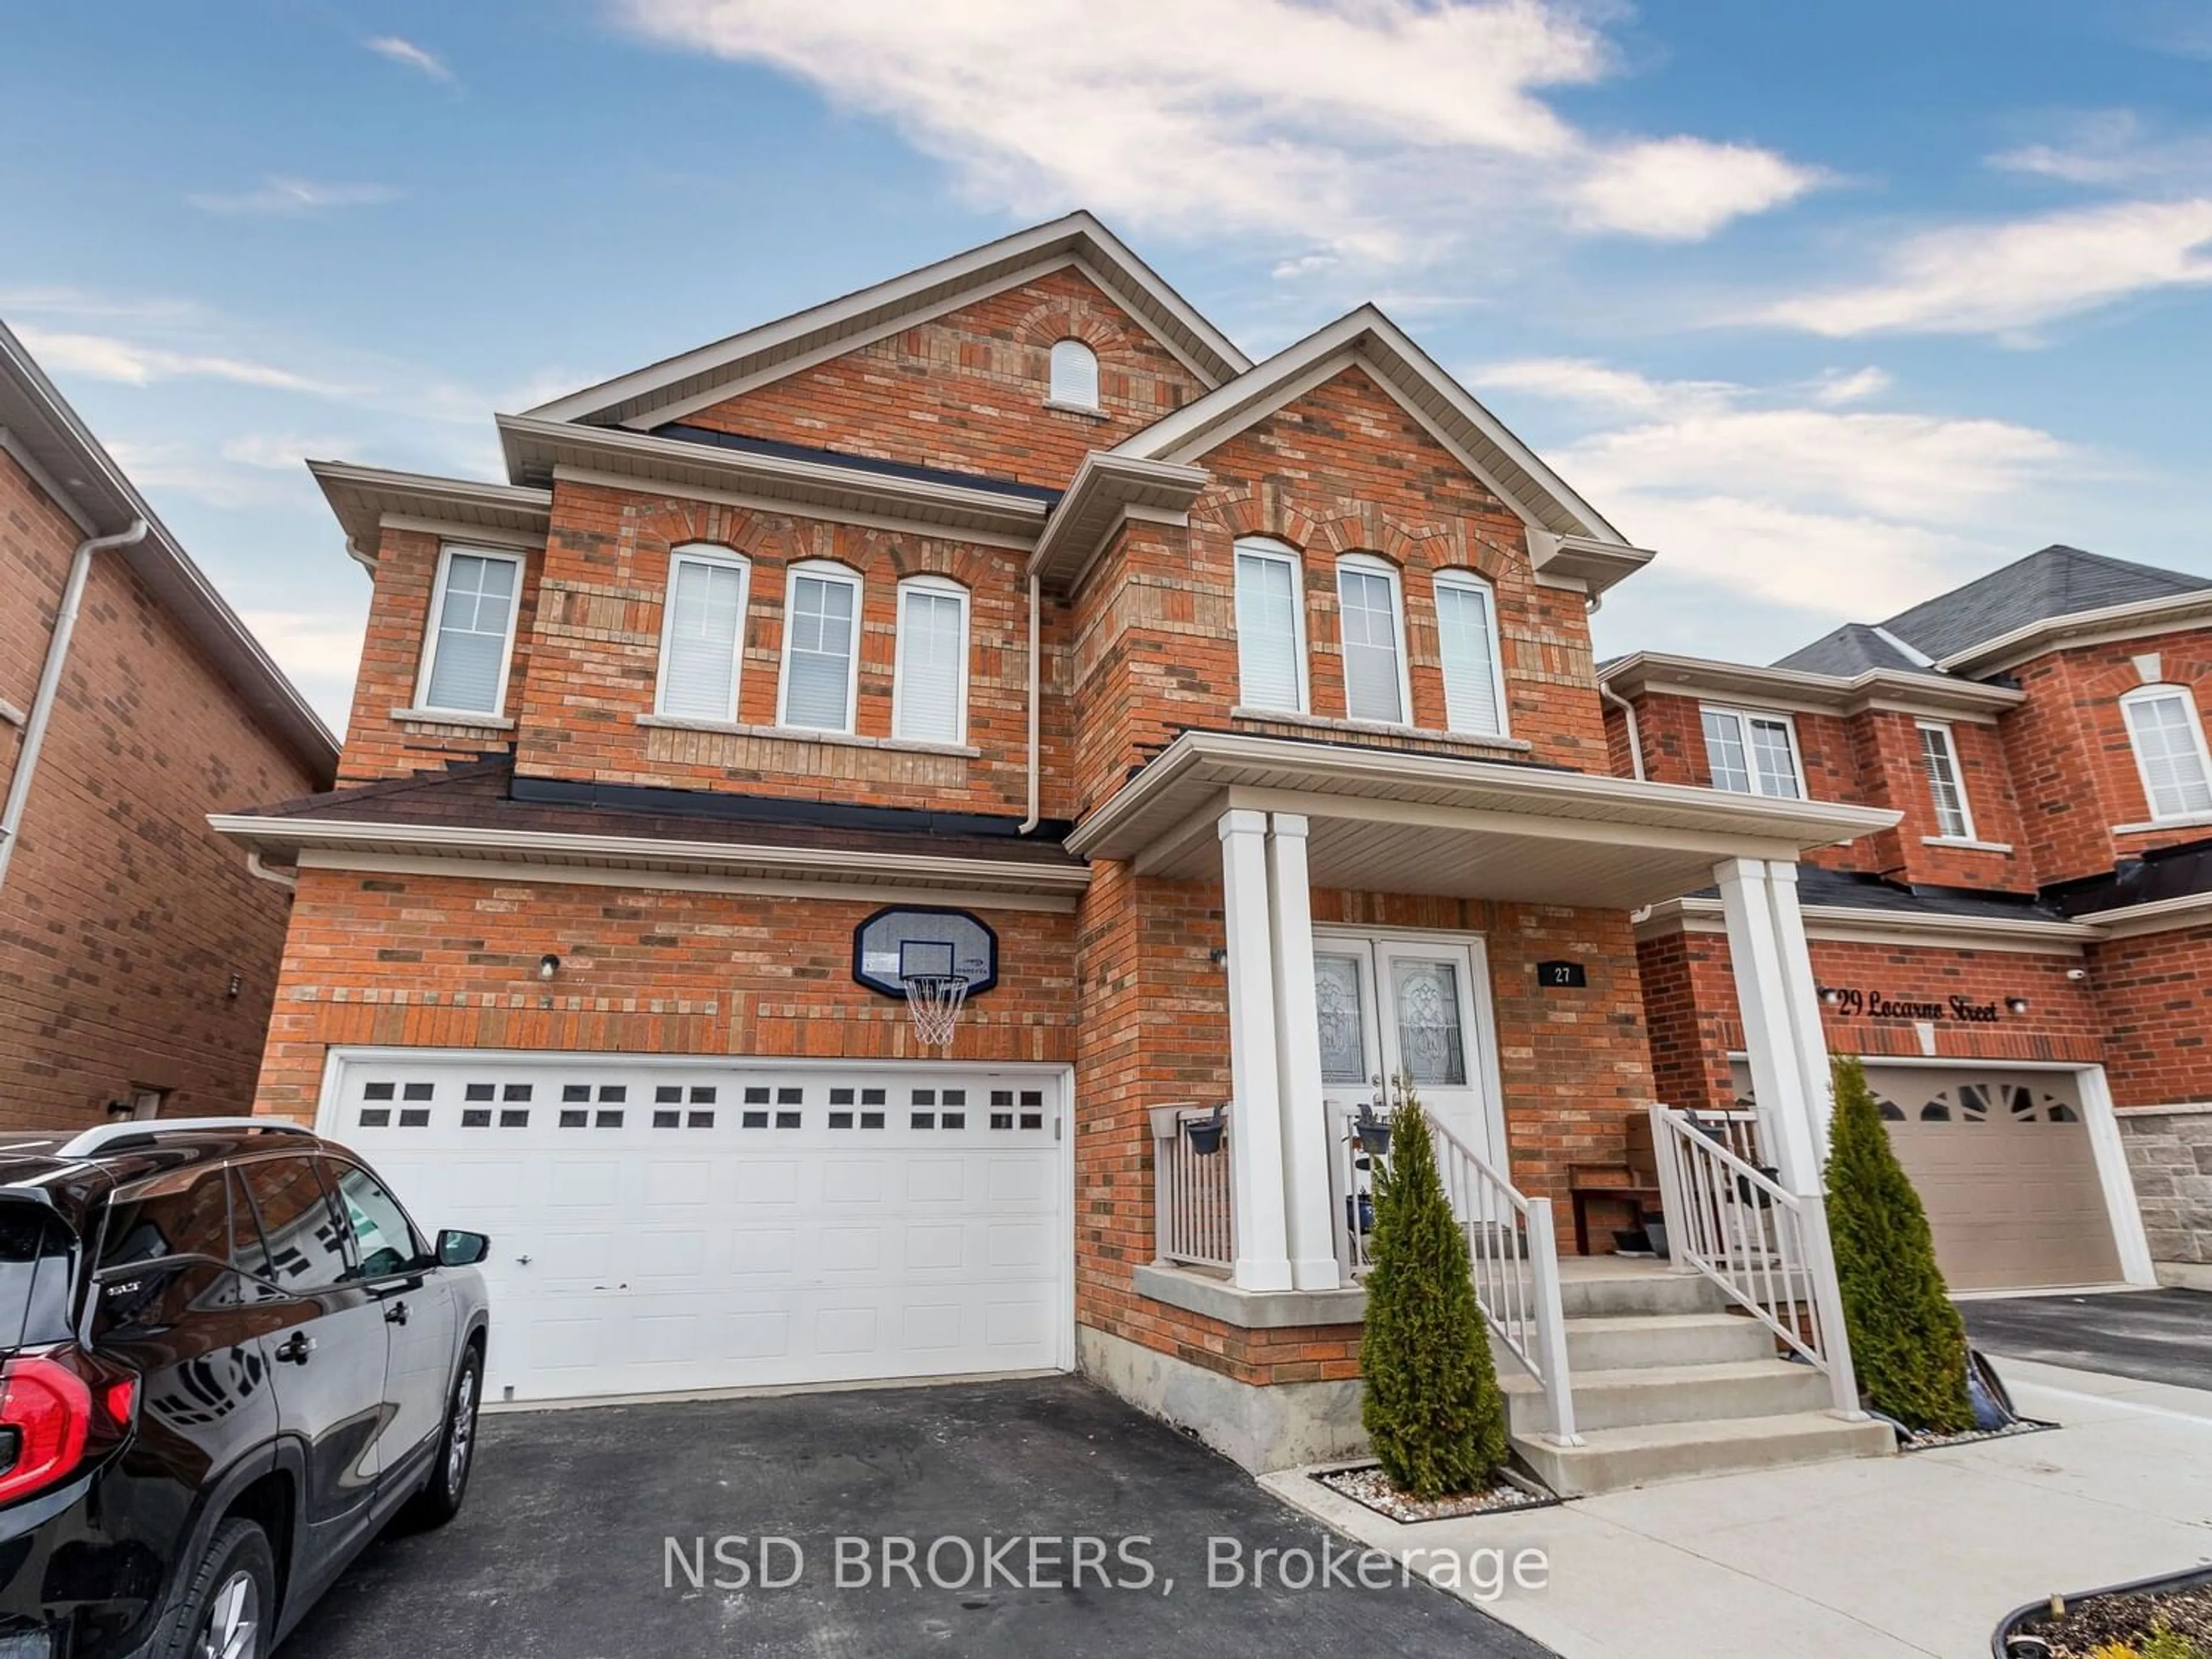 Home with brick exterior material for 27 Locarno St, Brampton Ontario L6R 3T8